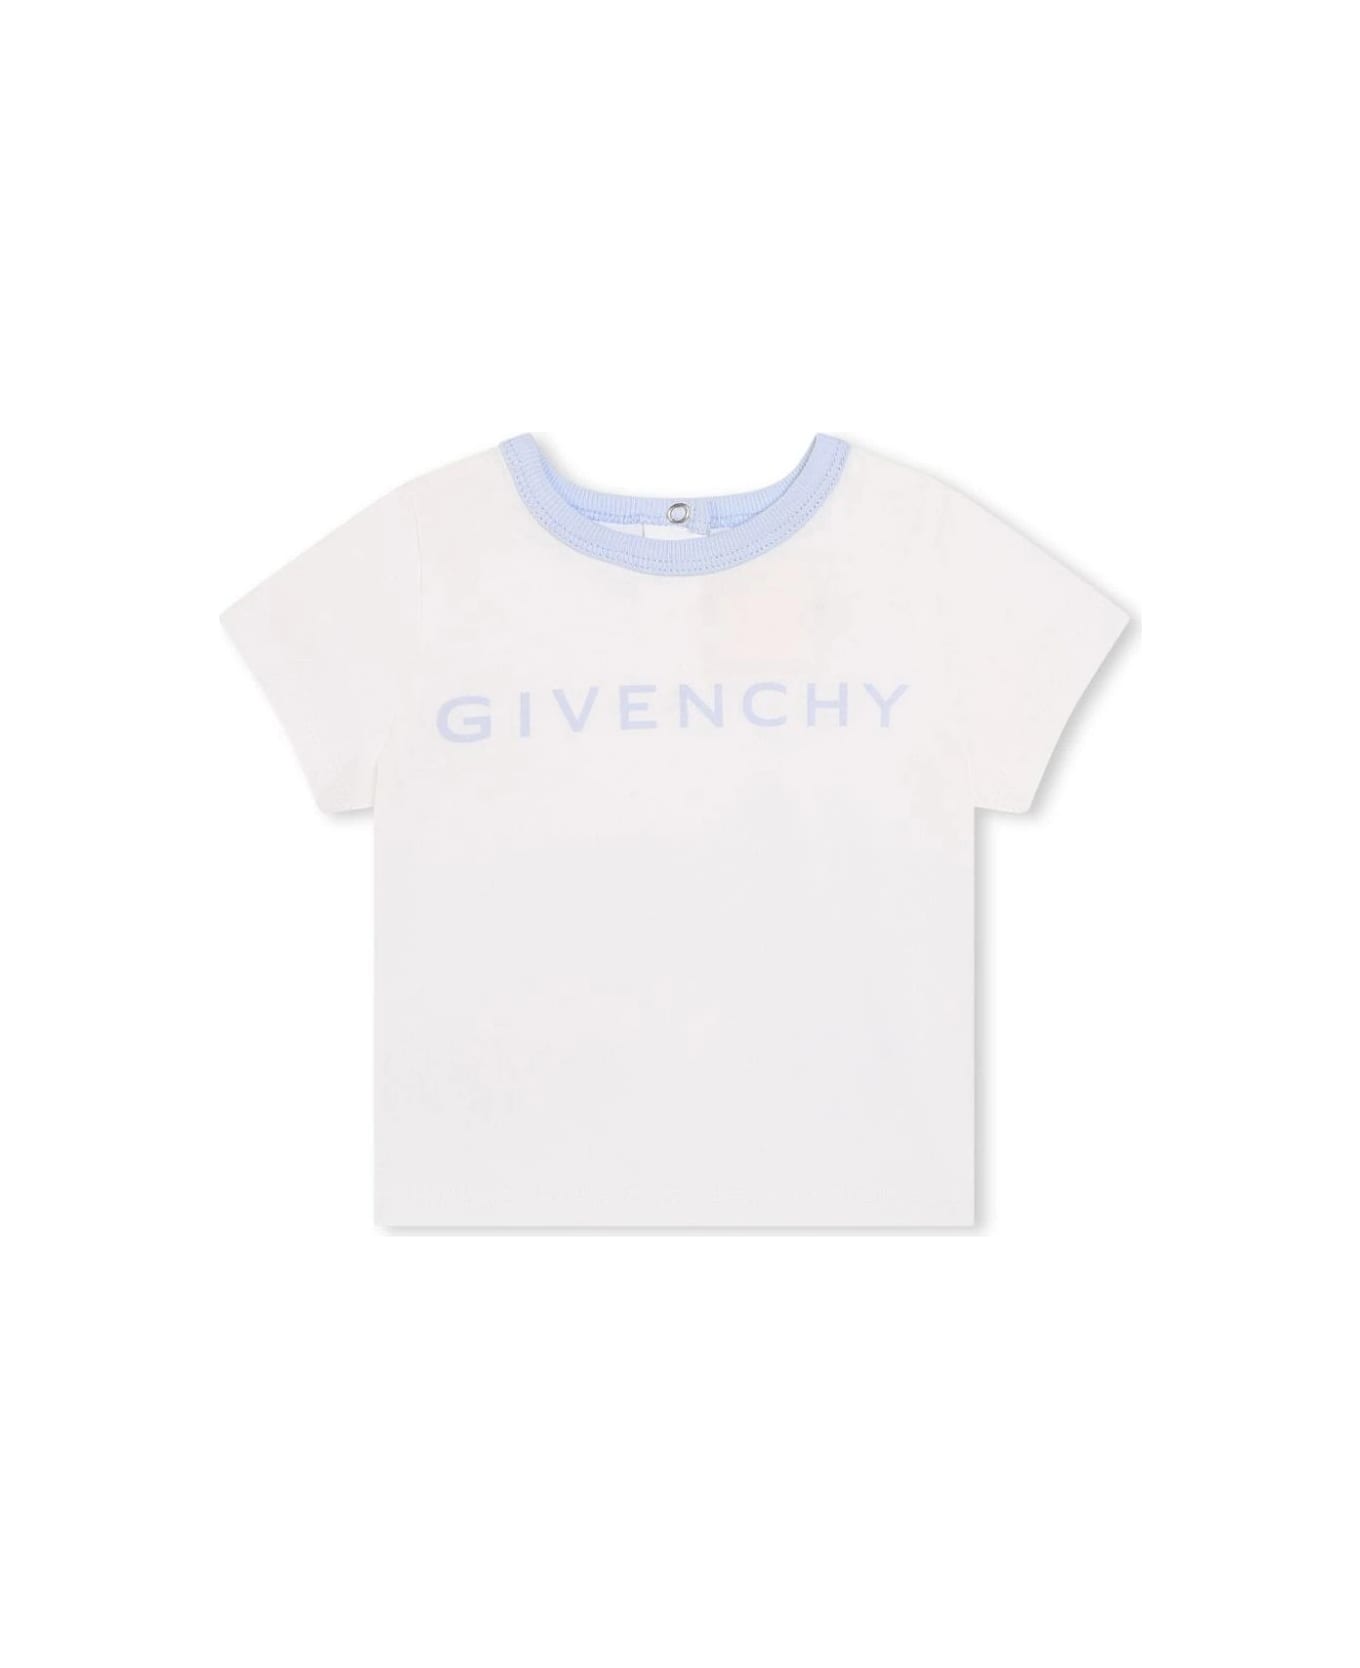 Givenchy 4g T-shirt And Dungaree Set In White And Light Blue - Blue